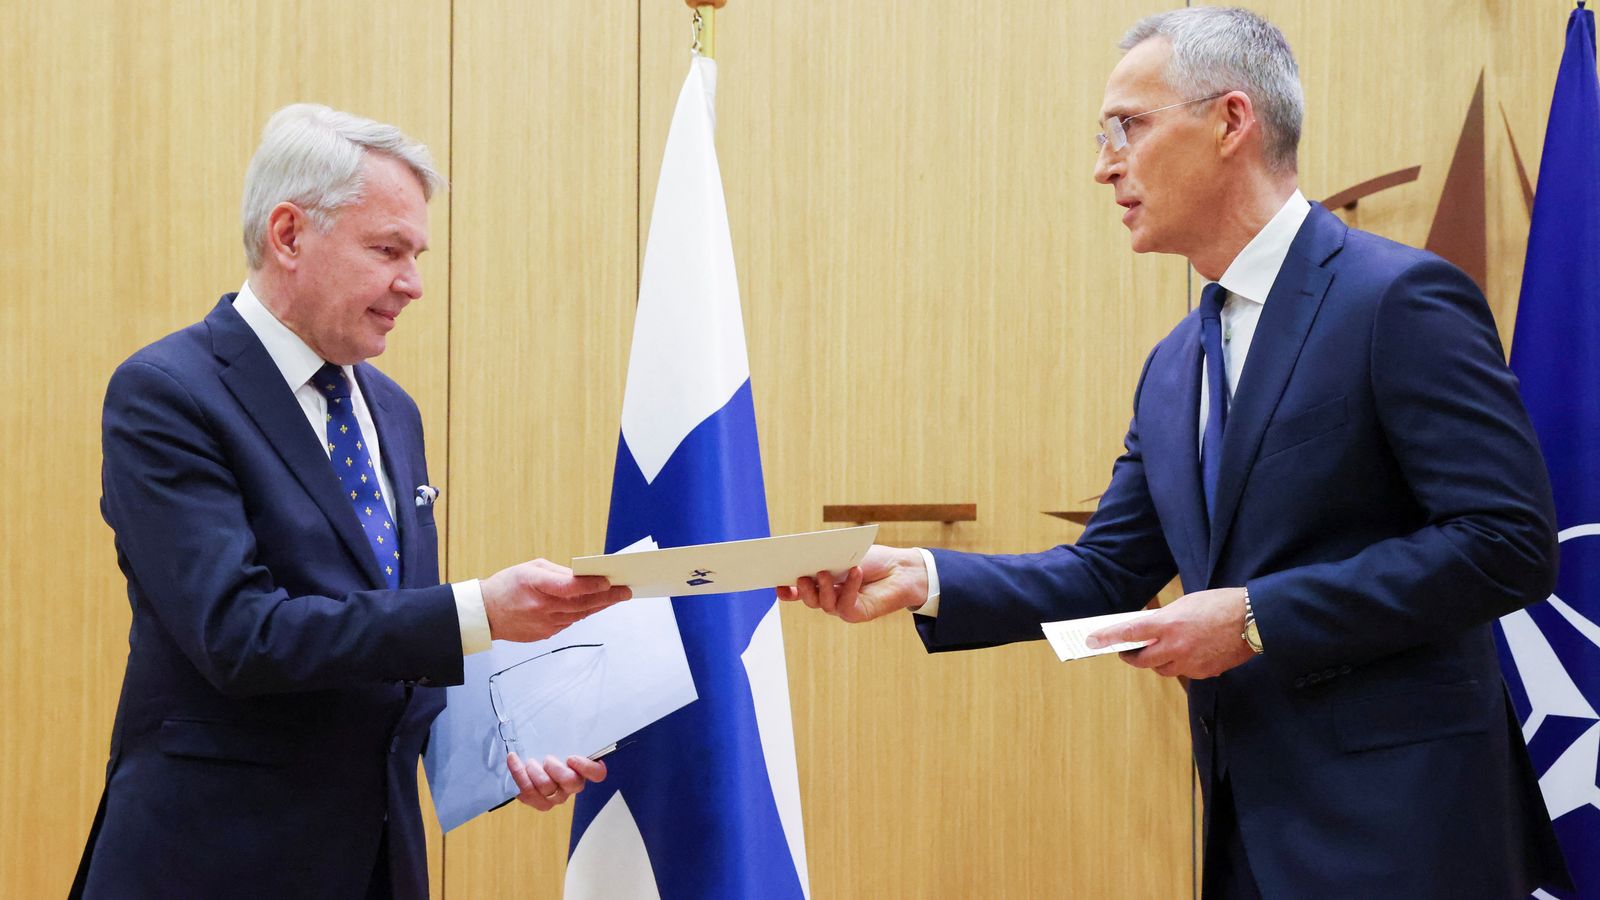 Finland officially joins NATO, as Russia threatens 'counter measures'